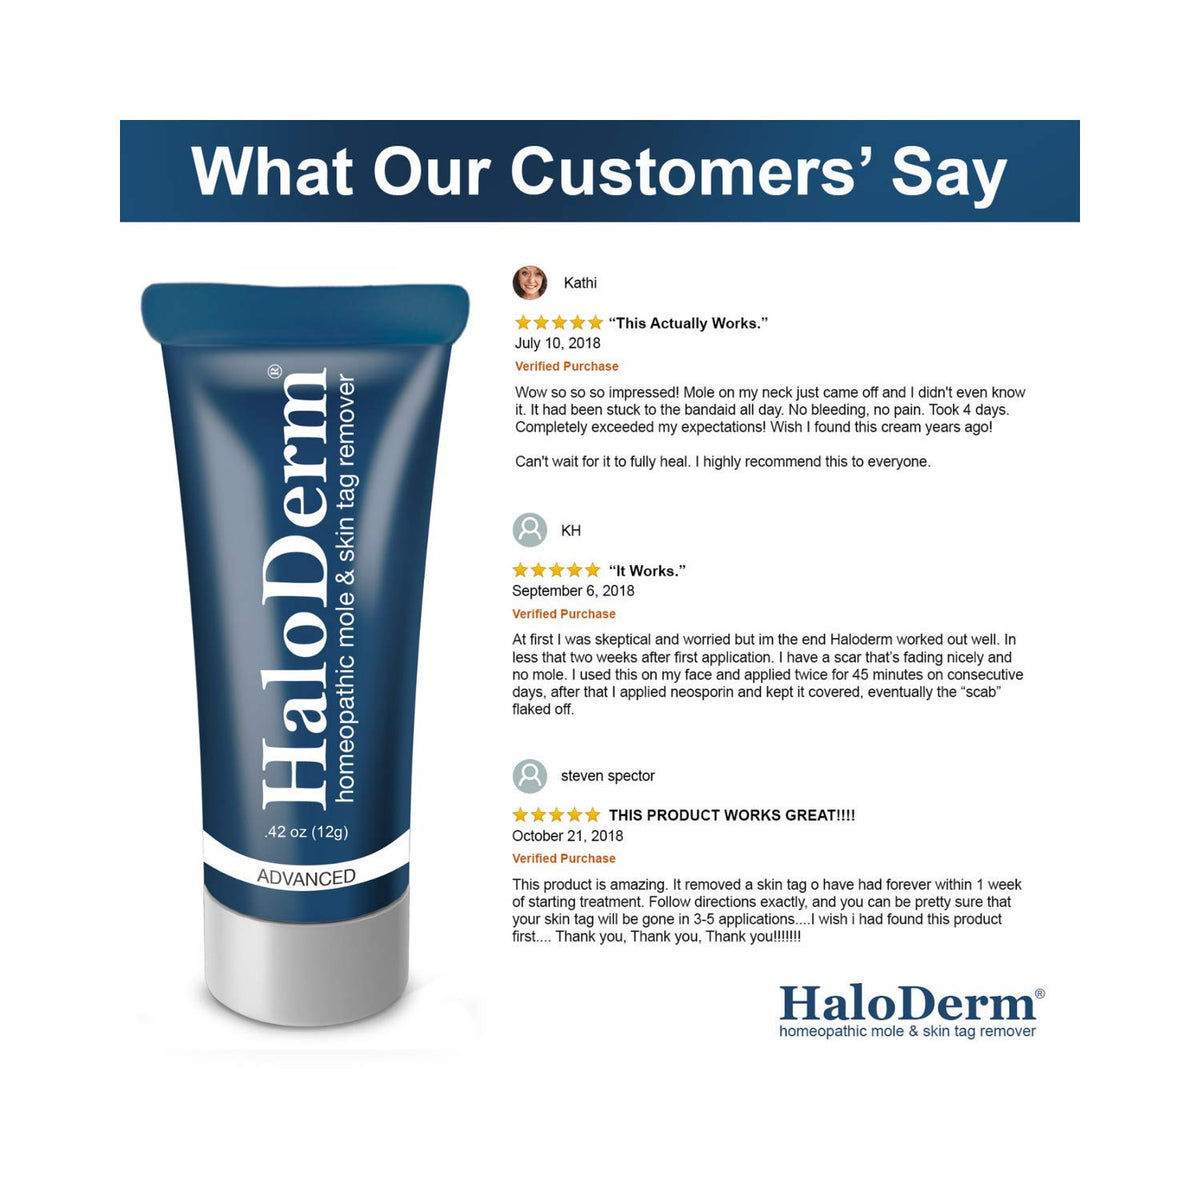 Haloderm Advanced Mole And Skin Tag Remover